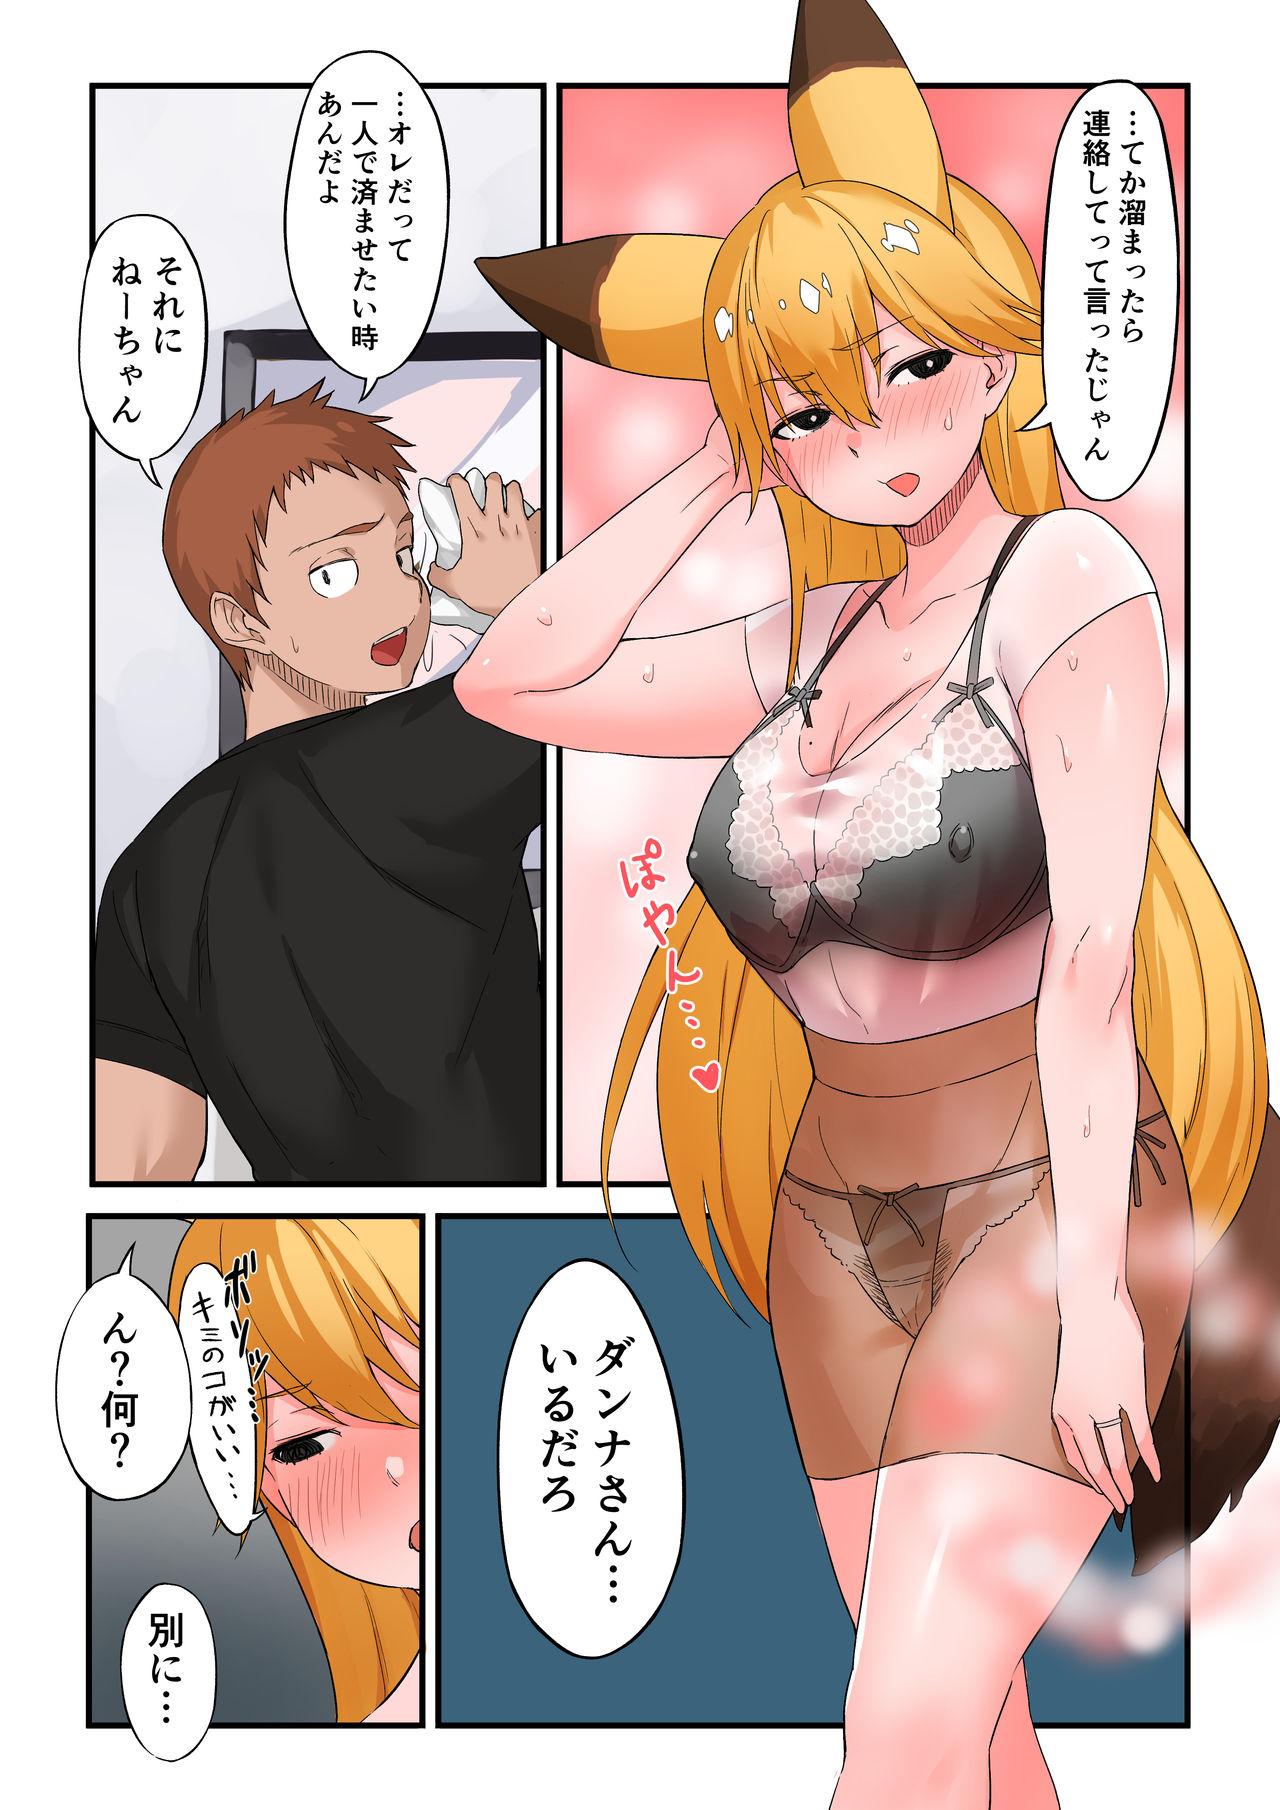 Free Oral Sex 巨乳人妻キタキツネ - Kemono friends Fuck For Money - Page 5